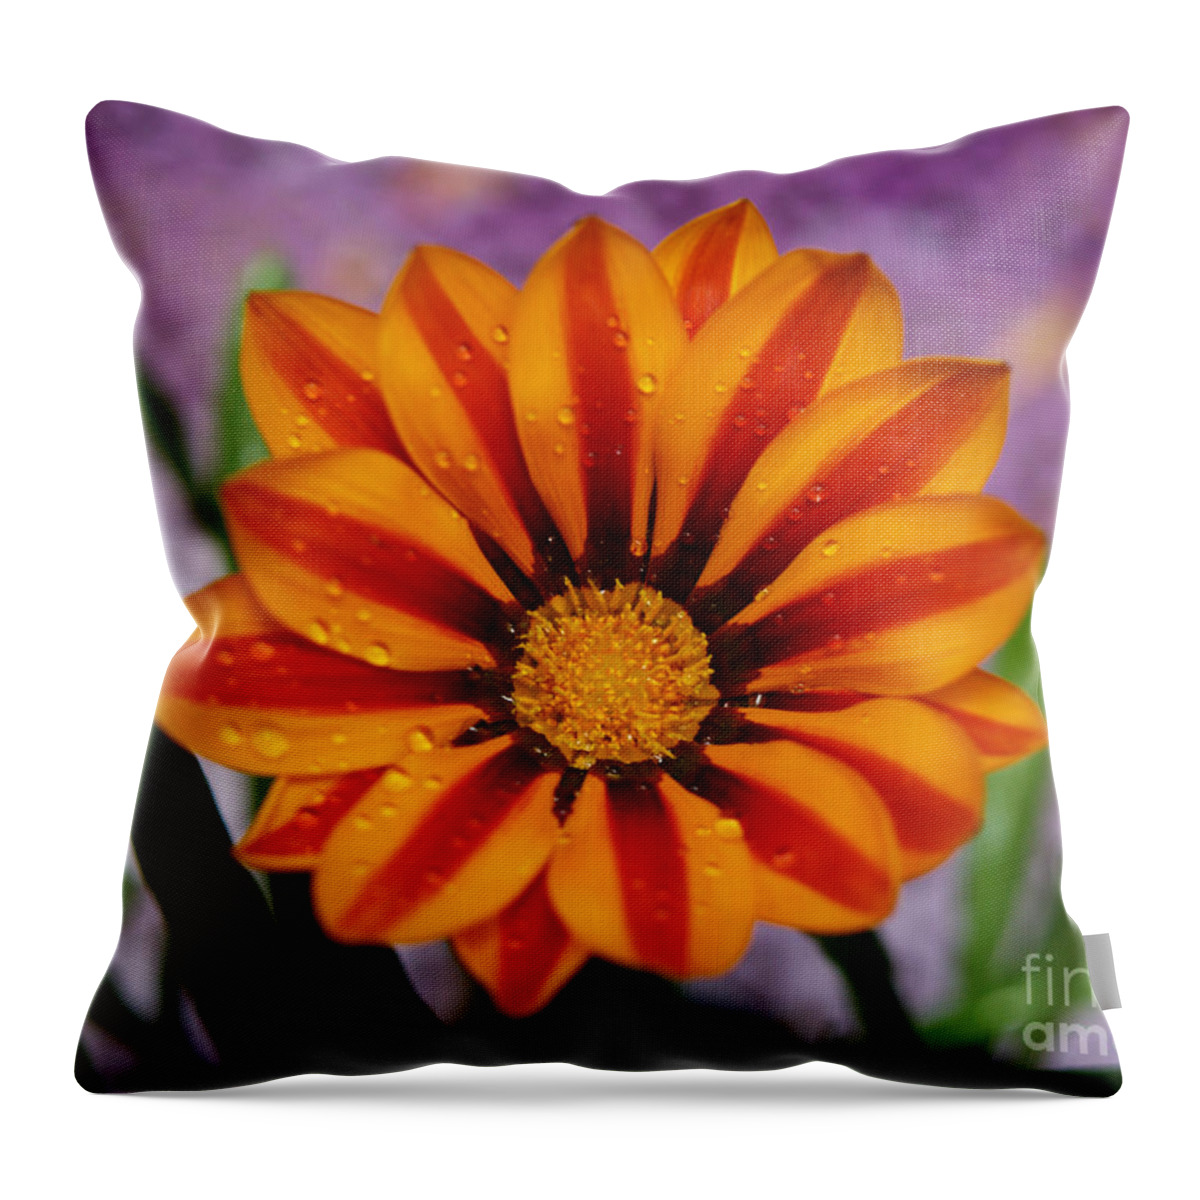 Flowers Throw Pillow featuring the photograph Bold Gazania Flower II by Dorothy Lee